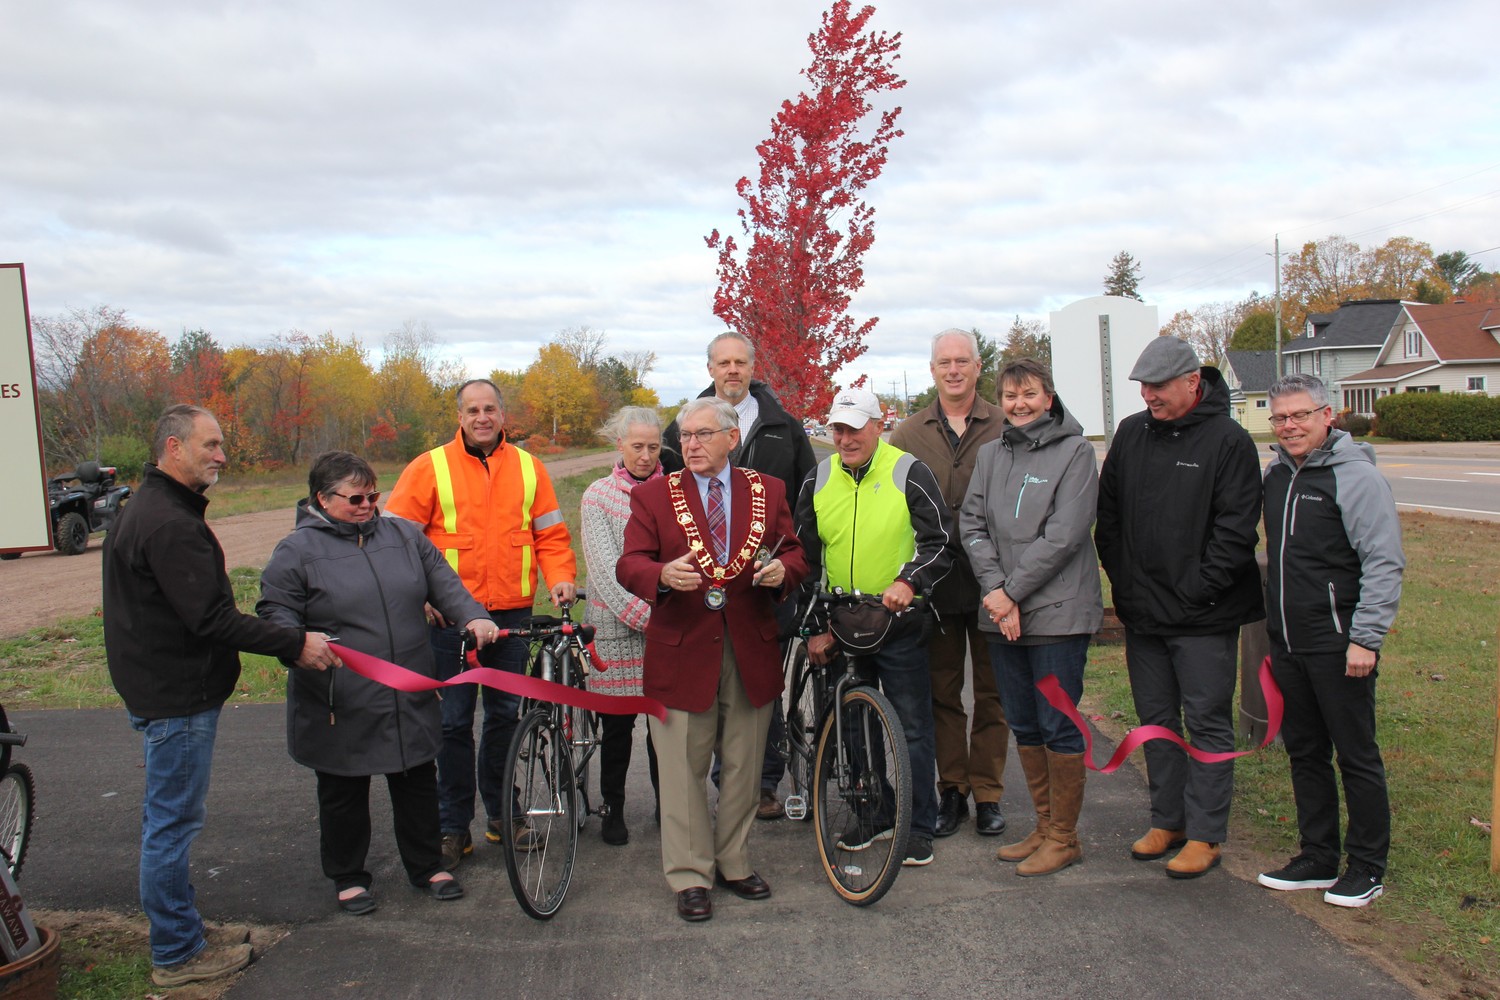 Official ribbon cutting in October, 2019 marked the opening of a twinned section of the Algonquin Trail through the urban commercial core of the Town of Petawawa. Members from the various groups involved in the trail attended. In the photo from left, Mark Reinert, Petawawa parks and recreation facilities supervisor, Sheila Clarke, Petawawa Accessibility Advisory Committee member, David Unrau (Petawawa public works director), Laura Lapinskie, constituency assistant to MPP John Yakabuski, Petawawa Mayor Bob Sweet, Jason Davis, manager of forestry and GIS services with Renfrew County, Ron Moss, Ottawa Valley Cycling and Active Transportation Alliance (OVCATA) secretary, Petawawa Councillor James Carmody, Dana Lawson, Garrison Petawawa Personnel Support Programs (PSP) health promotion manager, Kelly Williams, Petawawa community services director, and Petawawa CAO/clerk Dan Scissons. Photo by Anthony Dixon, Pembroke Observer, with permission.